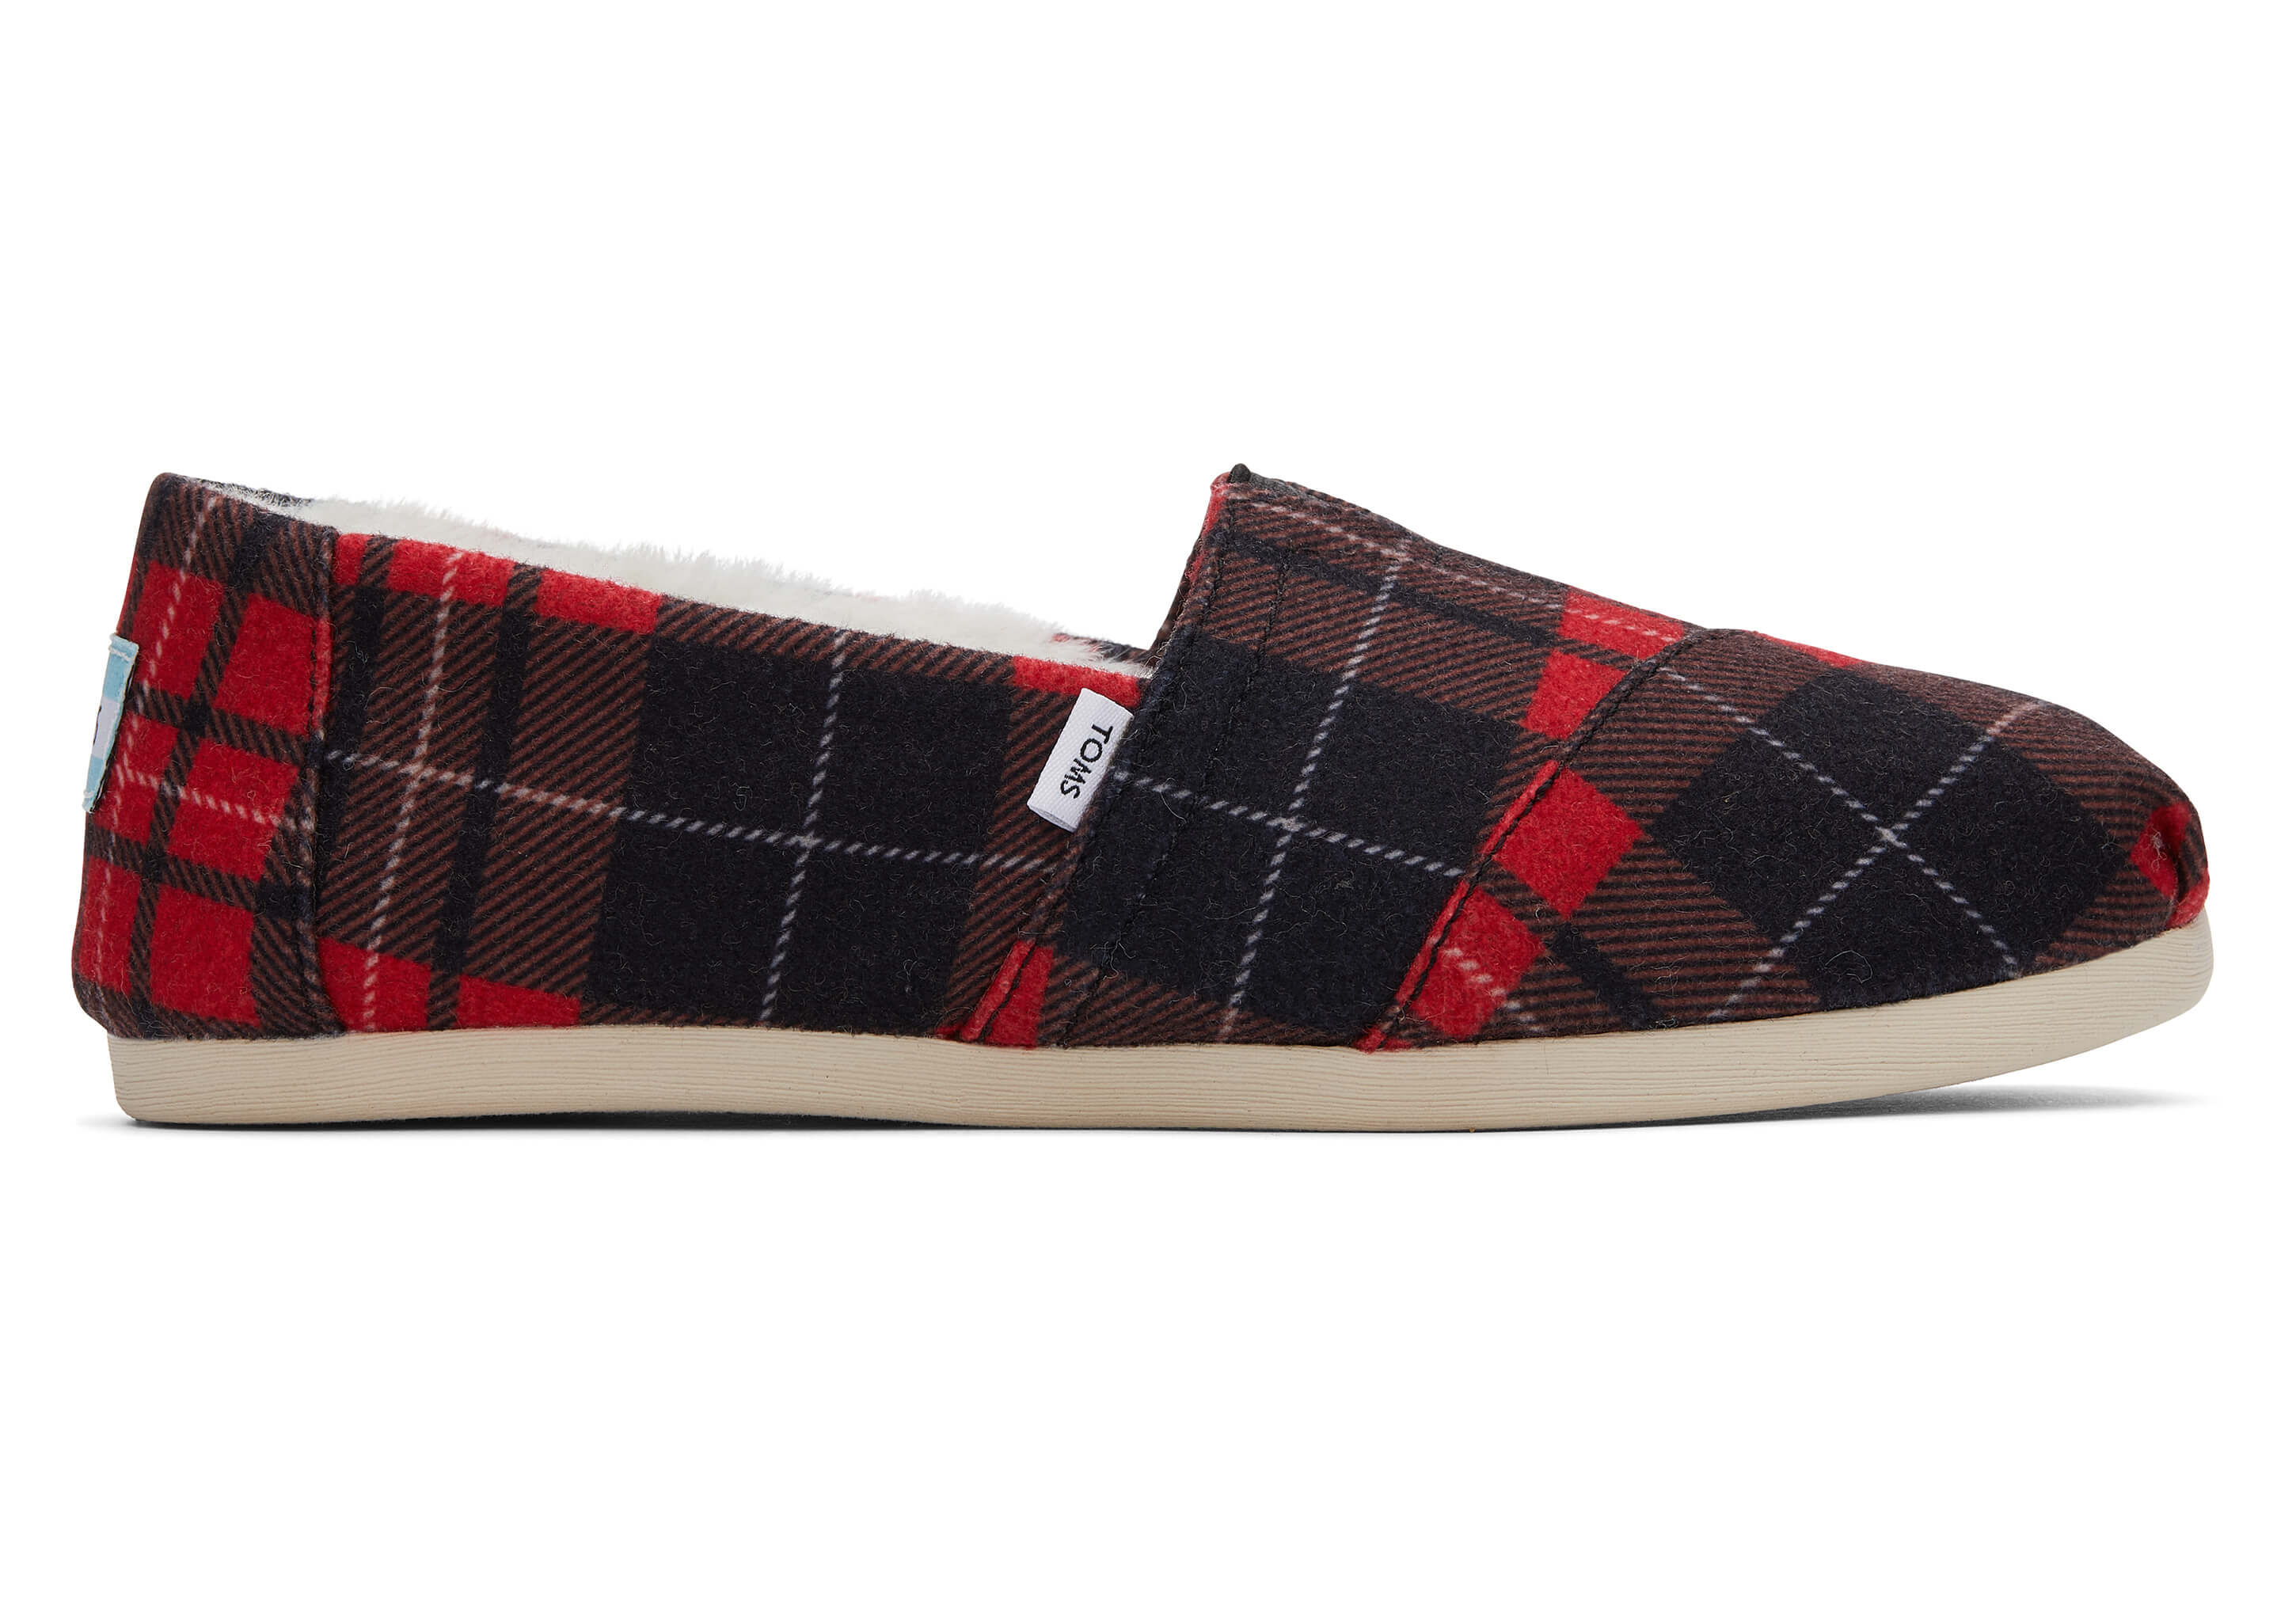 Shoes Womens Shoes Slip Ons Loafers Red plaid flats 